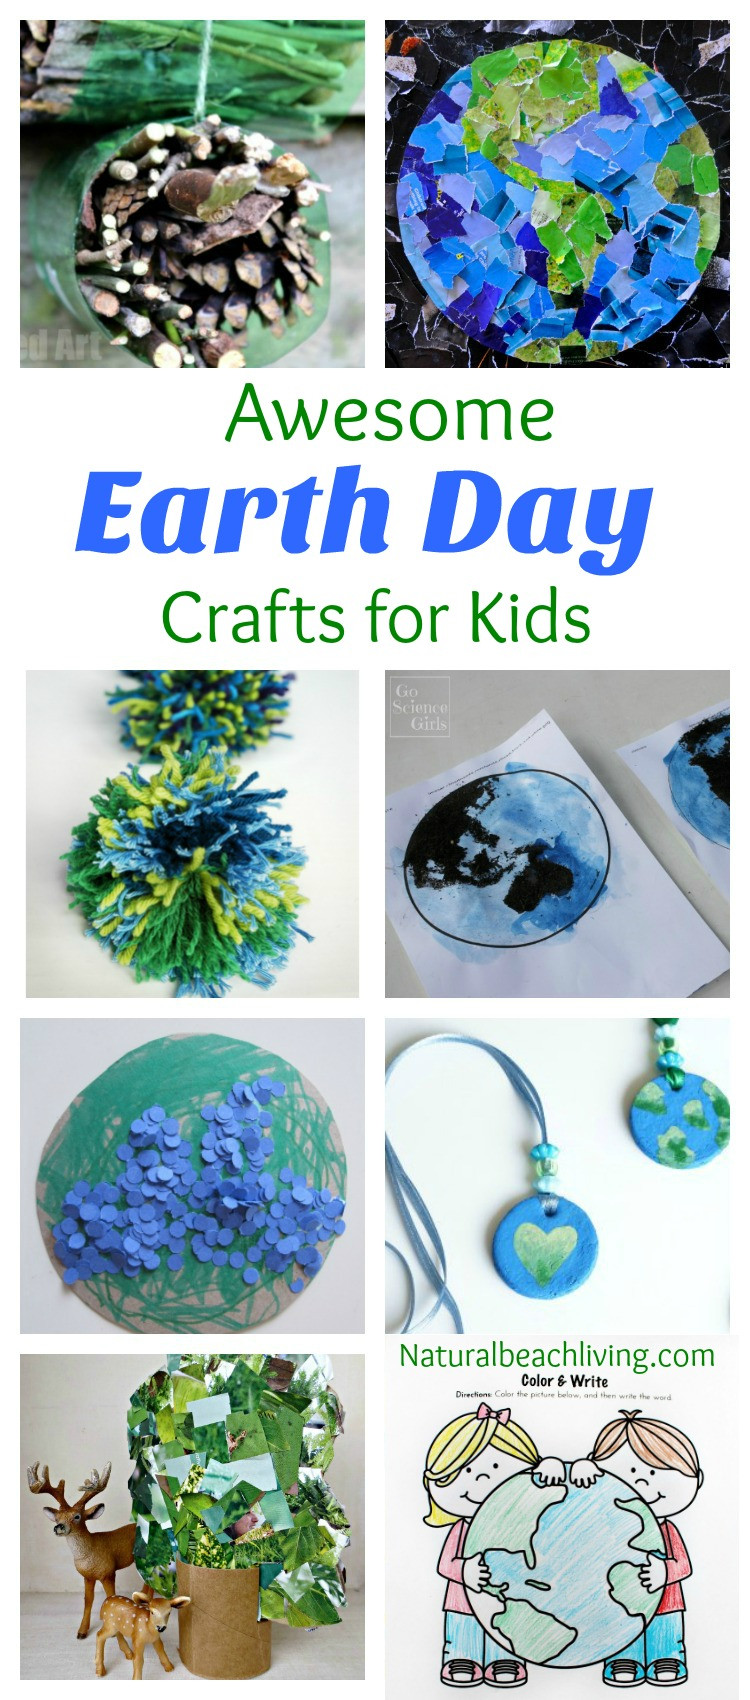 Earth Day Craft Ideas For Preschoolers
 30 Creative Earth Day Crafts and Activities for Kids